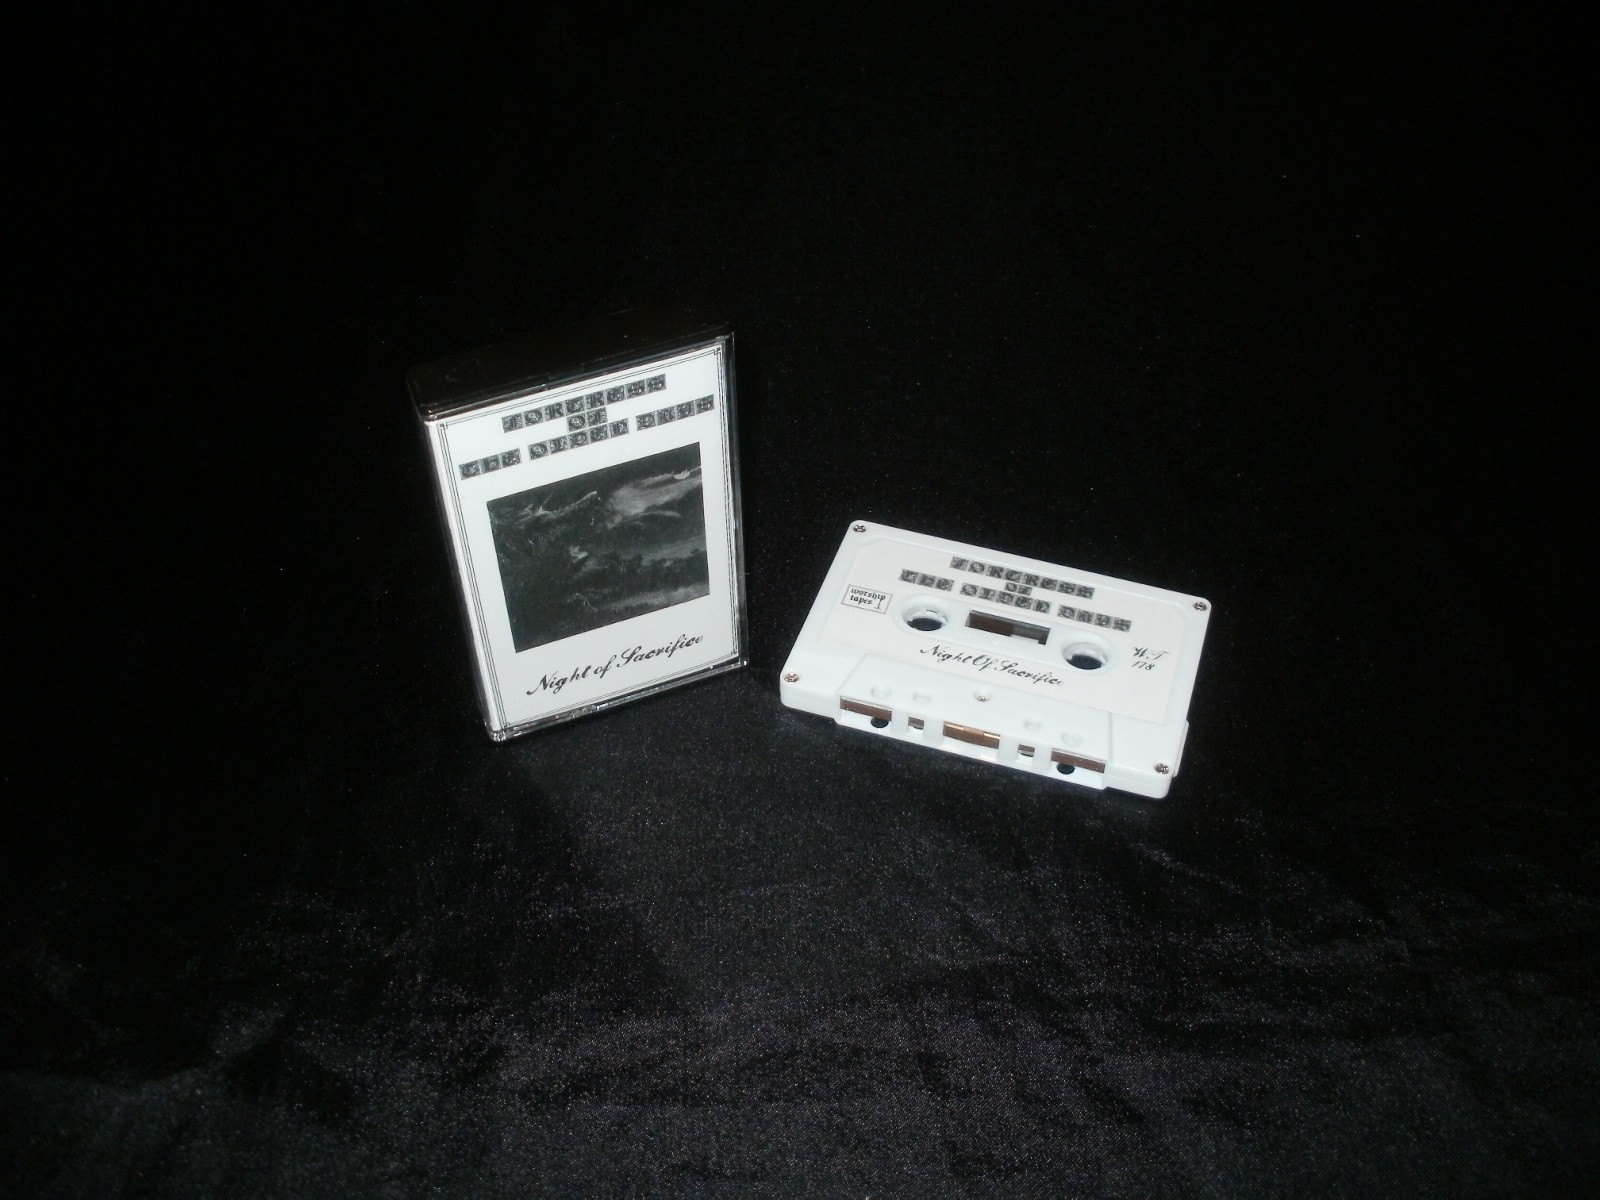  FORTRESS OF THE OLDEN DAYS - Night of Sacrifice Pro - Tape